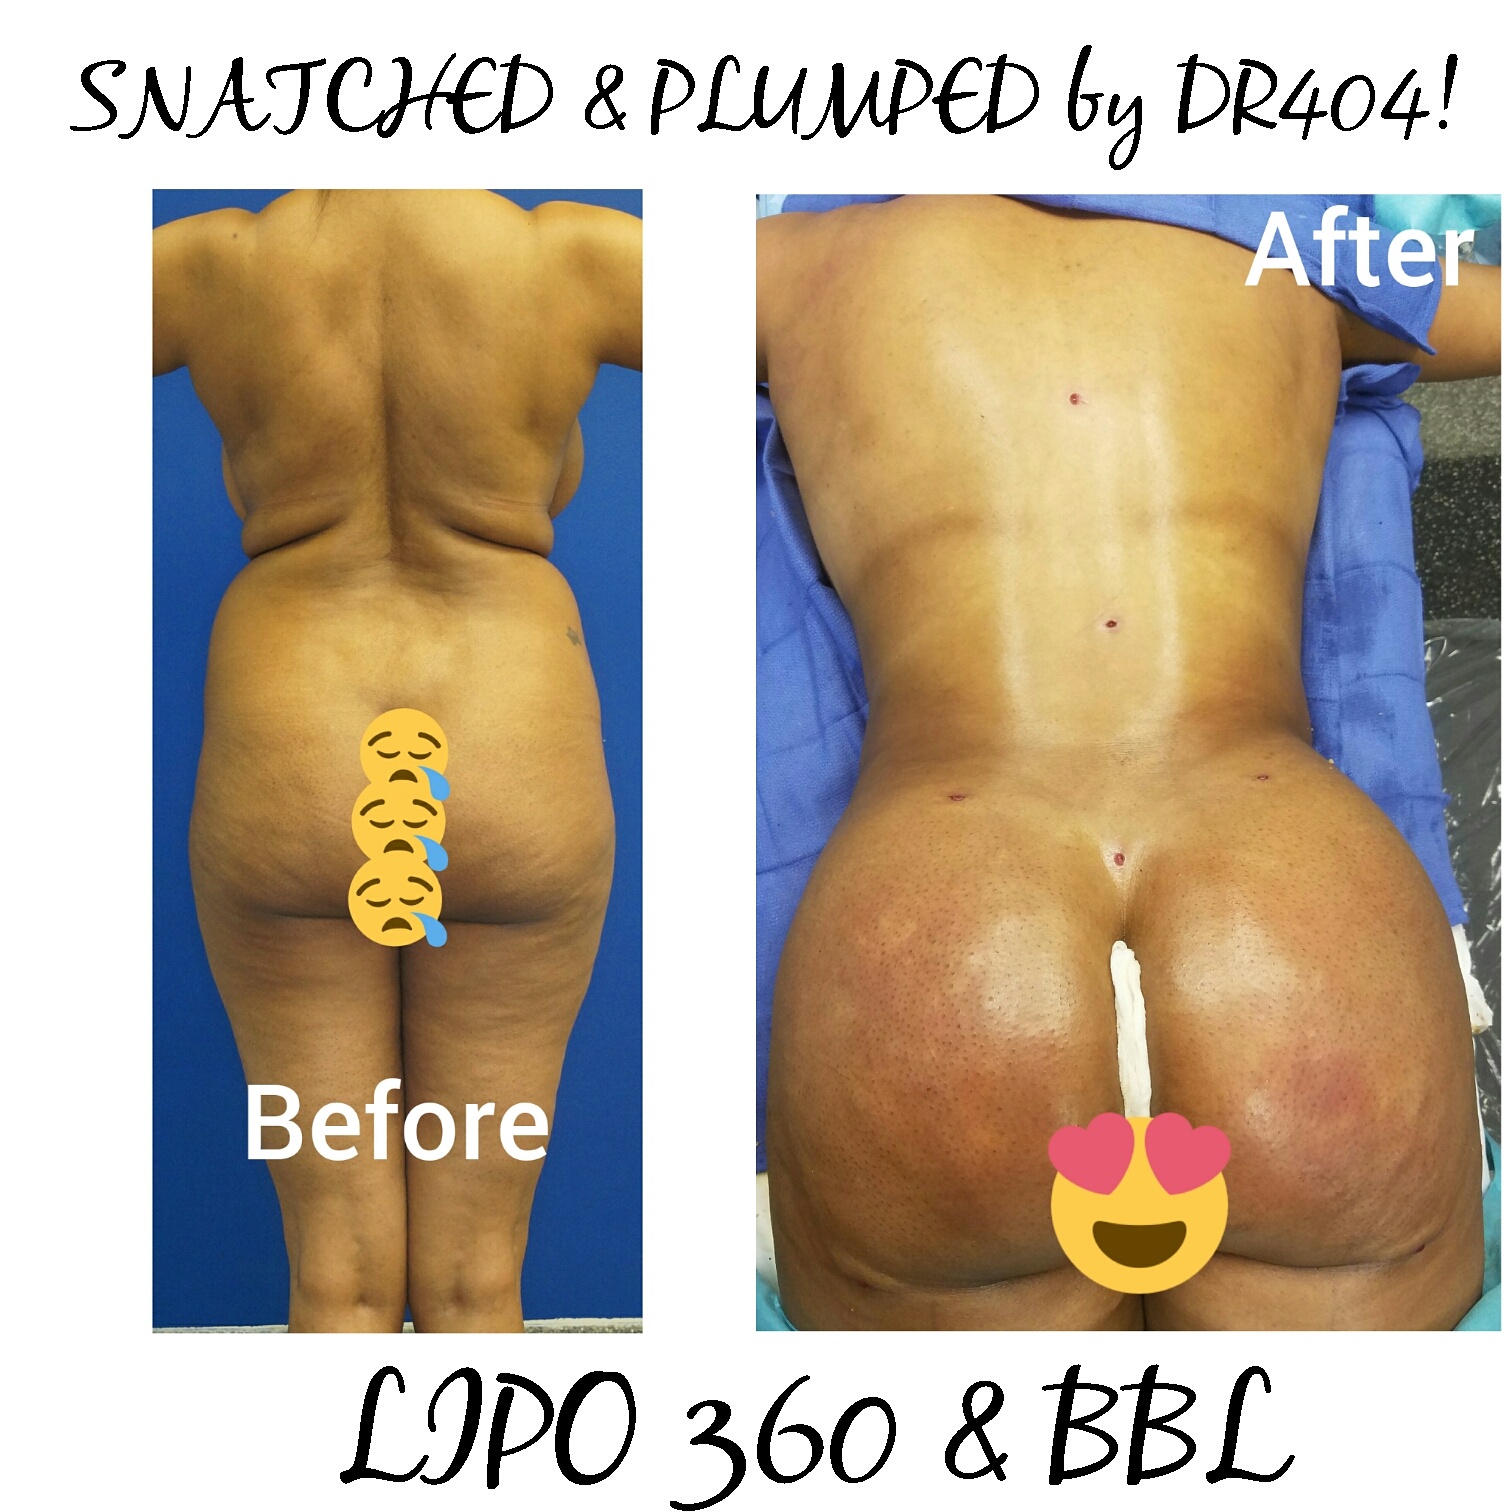 Atlanta Brazilian Butt Lift, Brazilian Butt Lift (BBL) utilizes liposuction plastic surgery performed by our liposuction surgeon. Liposuction is performed using tumescent anesthesia and traditional liposuction plastic surgery.  We are experts in laser liposuction (smartlipo), vaser liposuction and fat transfer, also known as fat grafting.  Brazilian butt lift atlanta has been popularized by Dr. Curves and others like therealdrmiami of snapchat fame have made Brazilian butt lifts extremely popular in recent years. Our autologous fat transfer is second to none and we utilize Platelet-Rich Plasma (PRP) which helps stabilize the fat transfer faster by promoting blood vessels to grow into the fat grafting. Most people think that a Brazilian butt lift (BBL) is a plastic surgery procedure but instead it is a cosmetic surgery procedure strictly performed for enhancement of the buttock area to transform your butt into the big Brazilian butt and replicate the popular Brazilian ass that Brazilian butt women have been getting Brazilian butt lifts to have for years.  As part of our mommy makeover packages you can combine a Brazilian ass with a tummy tuck and/or breast augmentation with a mastopexy, which is more commonly associated with a mommy makeover.